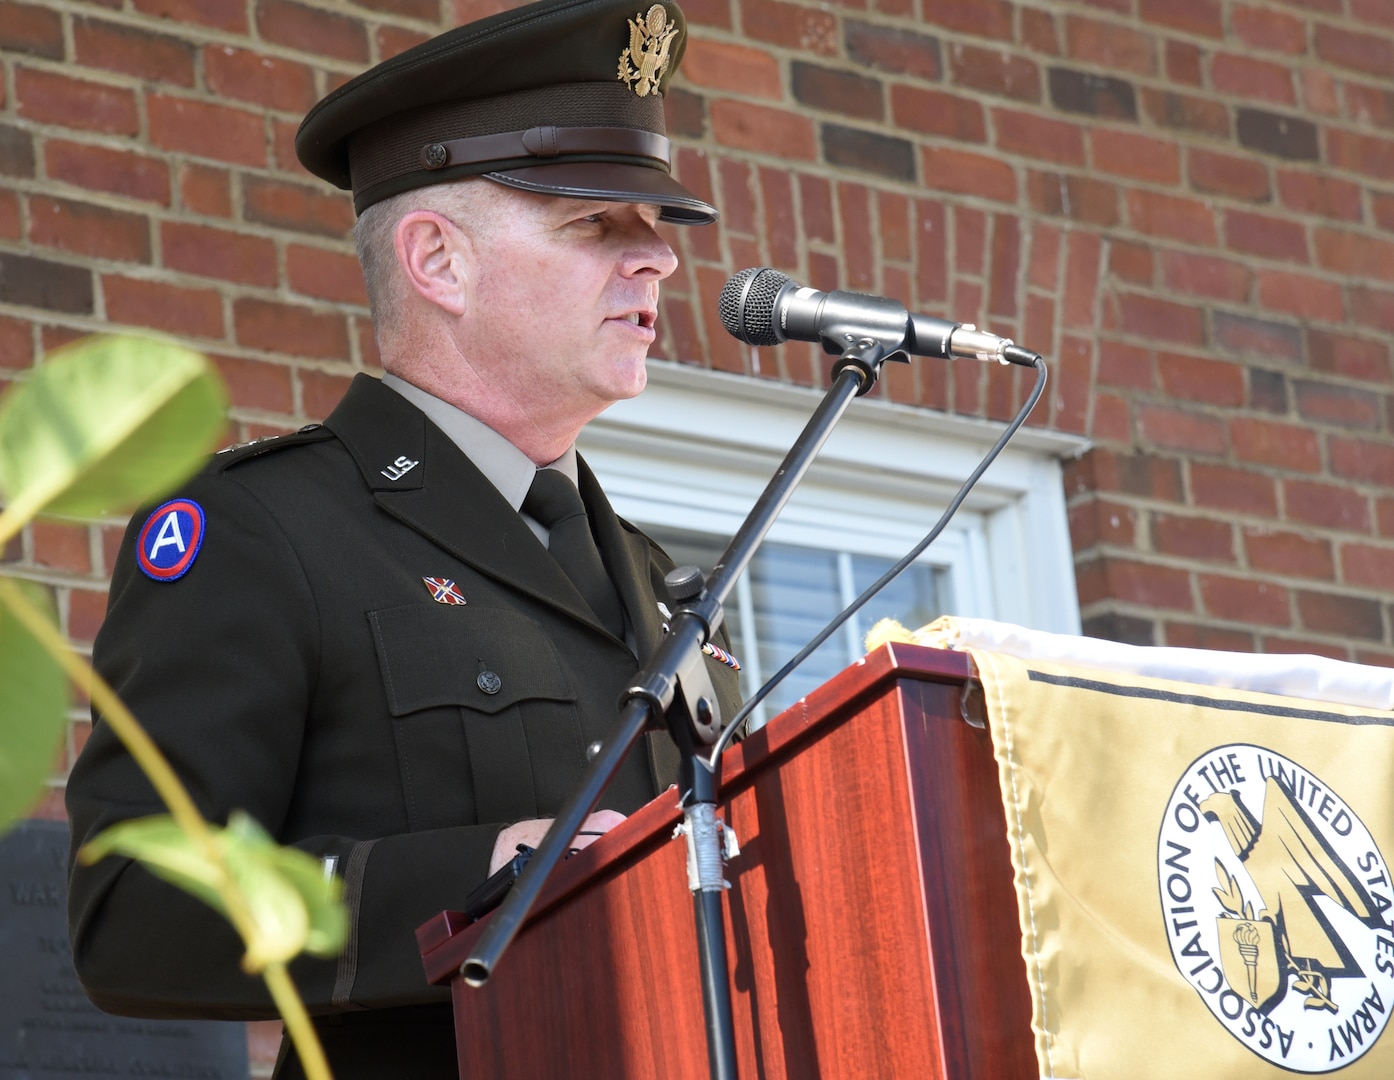 Maj. Gen. Timothy P. Williams, the Adjutant General of Virginia, gives remarks and participates in a ceremonial cake cutting during the Flag Day and Army Birthday event hosted by the Allegheny - Blue Ridge chapter of the Association of the U.S. Army June 13, 2021, in Vinton, Virginia.